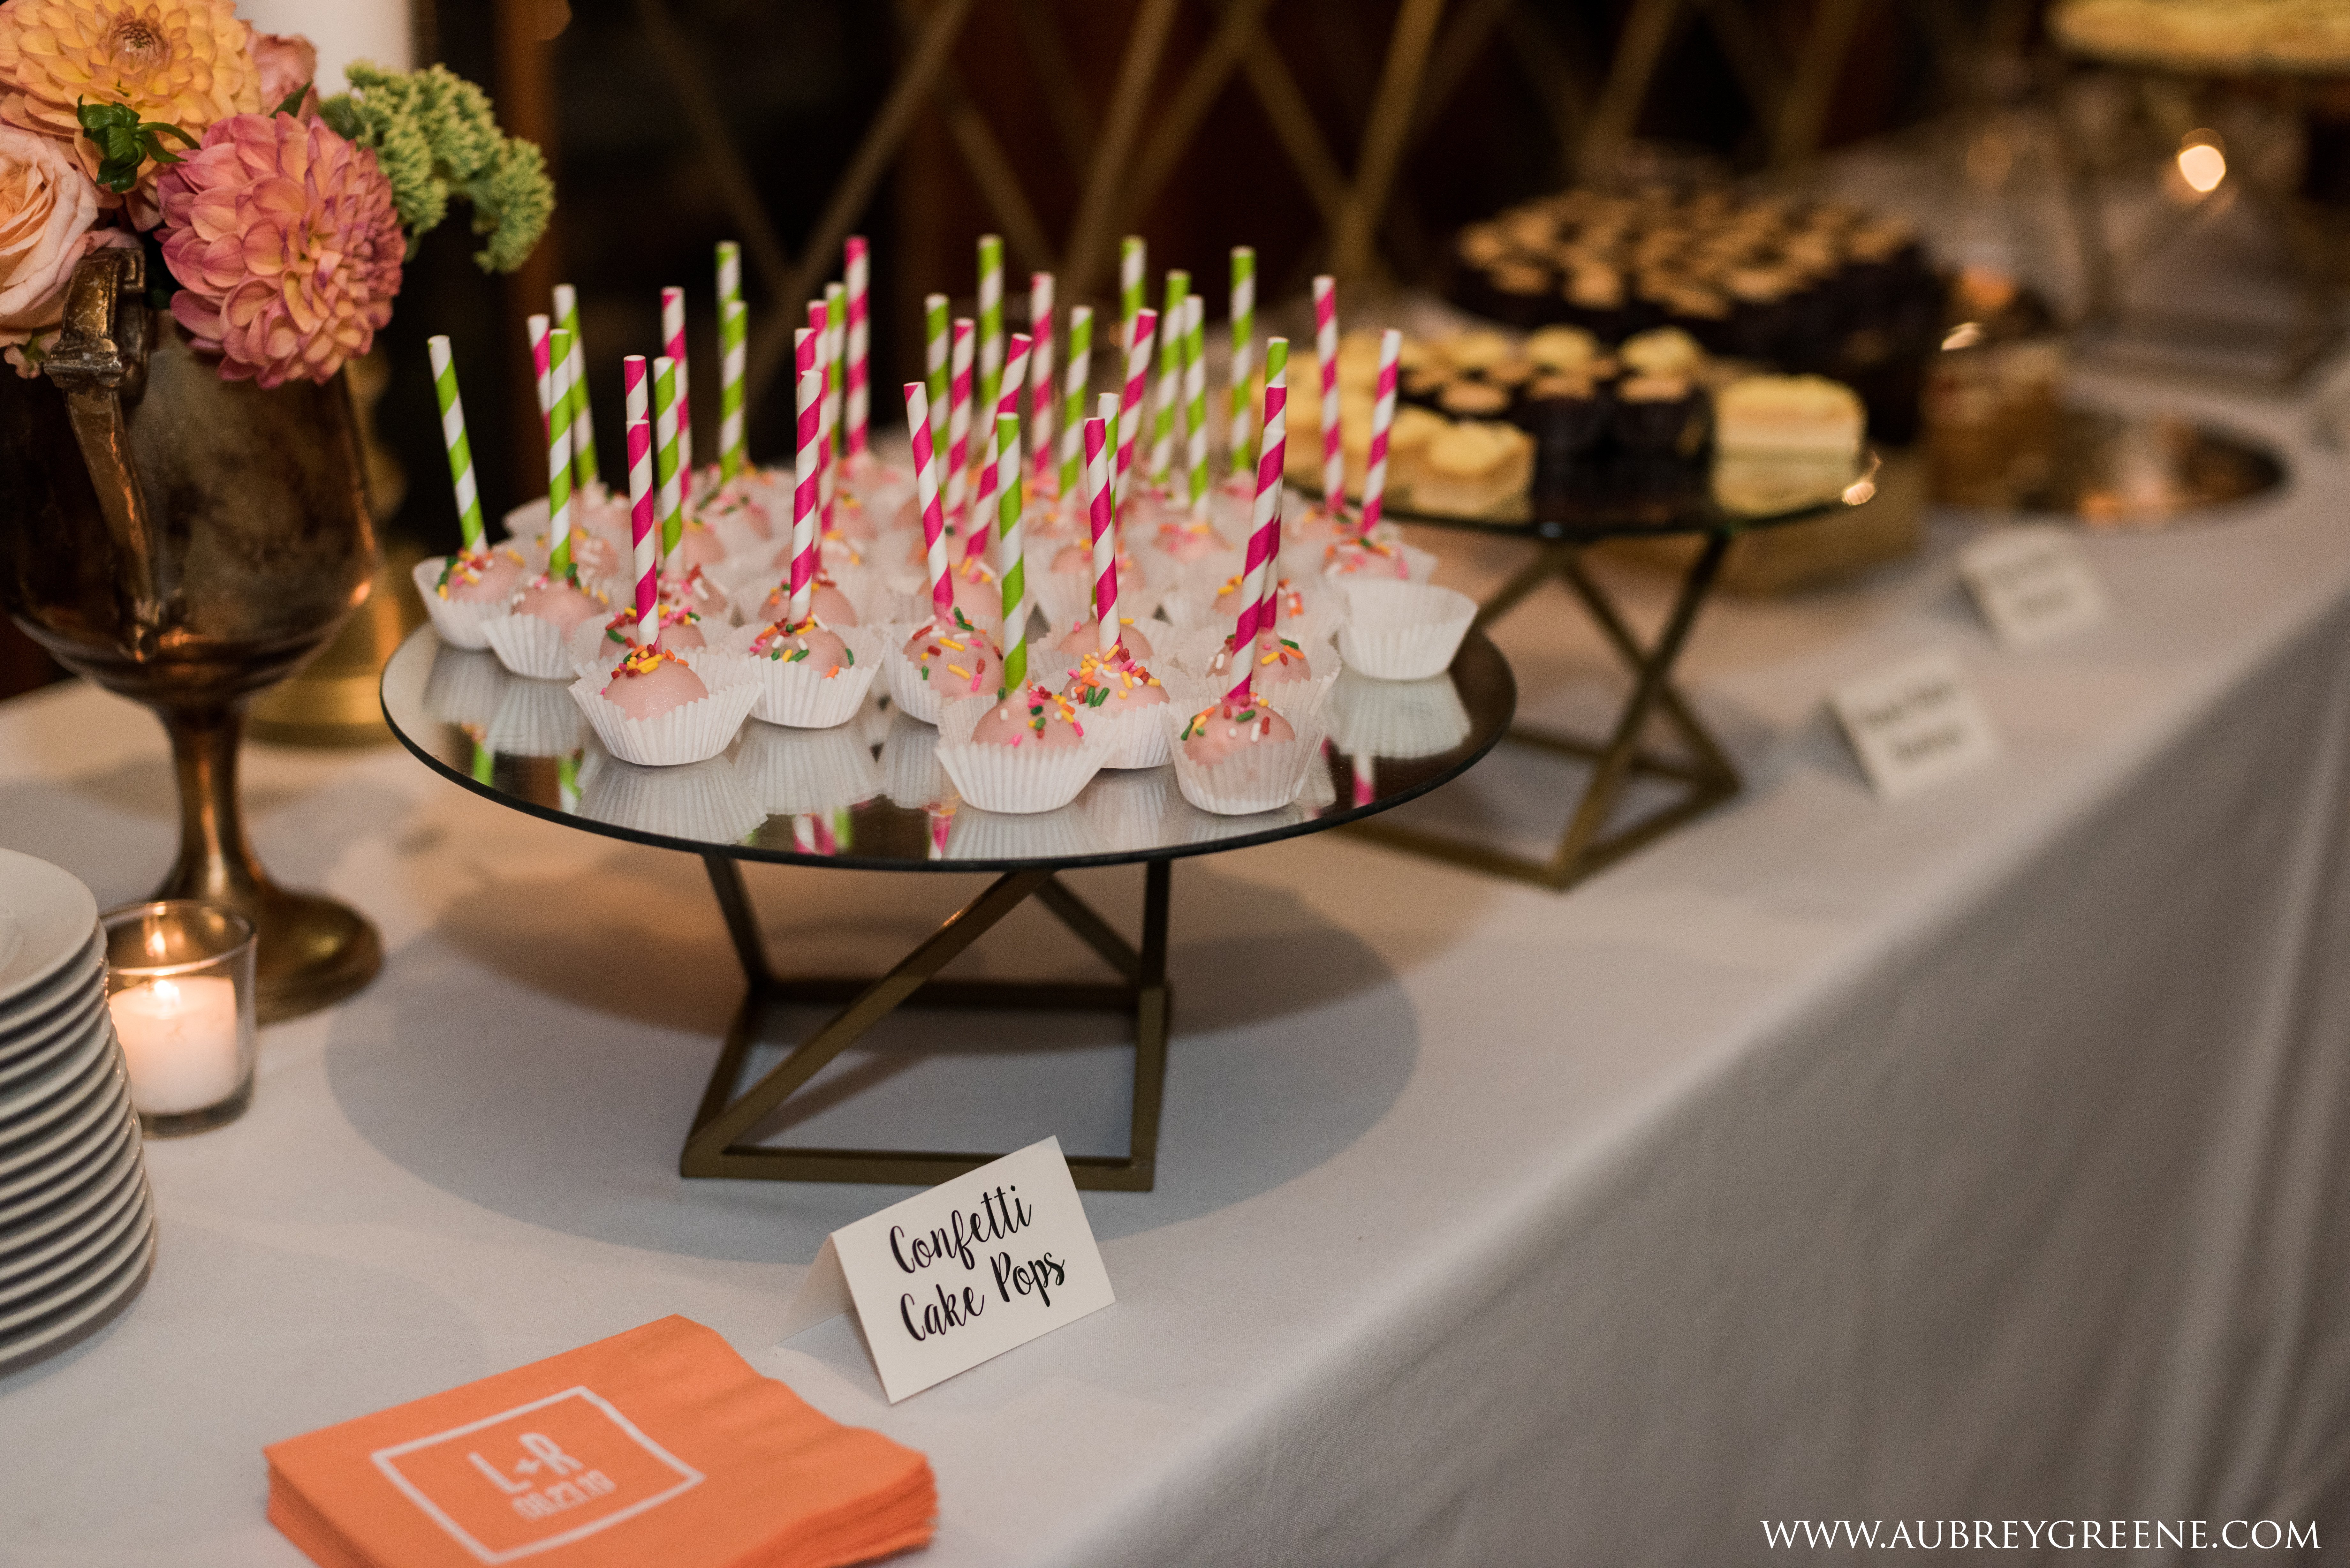 Why you need charger plates on your wedding tables – Confetti Sweethearts, Wedding Styling, Prop Hire, Foil Wedding Stationery